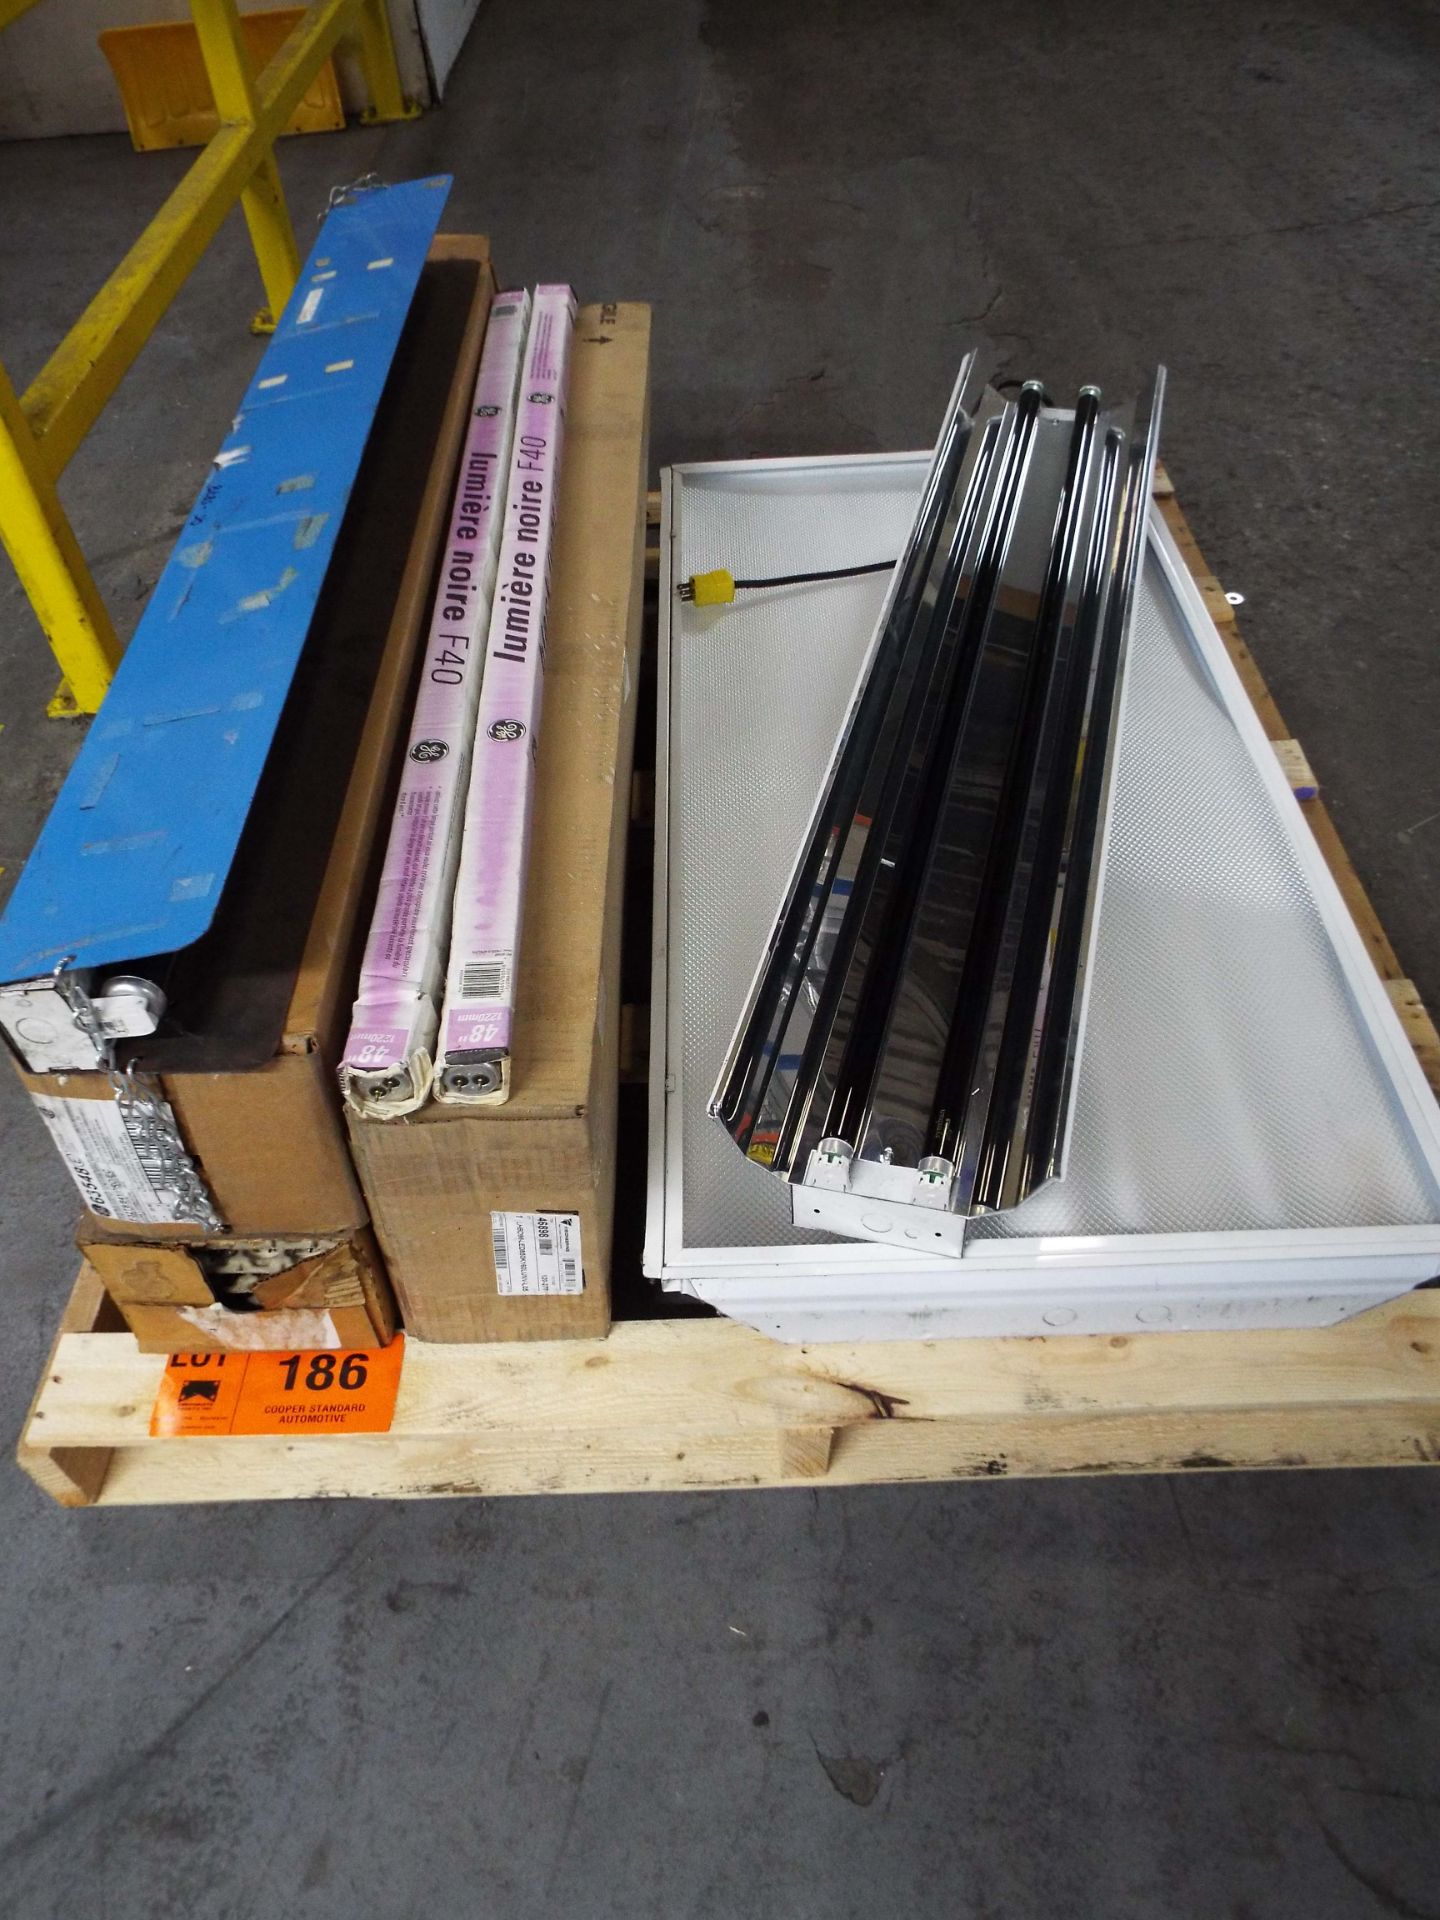 LOT/ PALLET WITH CONTENTS CONSISTING OF LIGHTING COMPONENTS